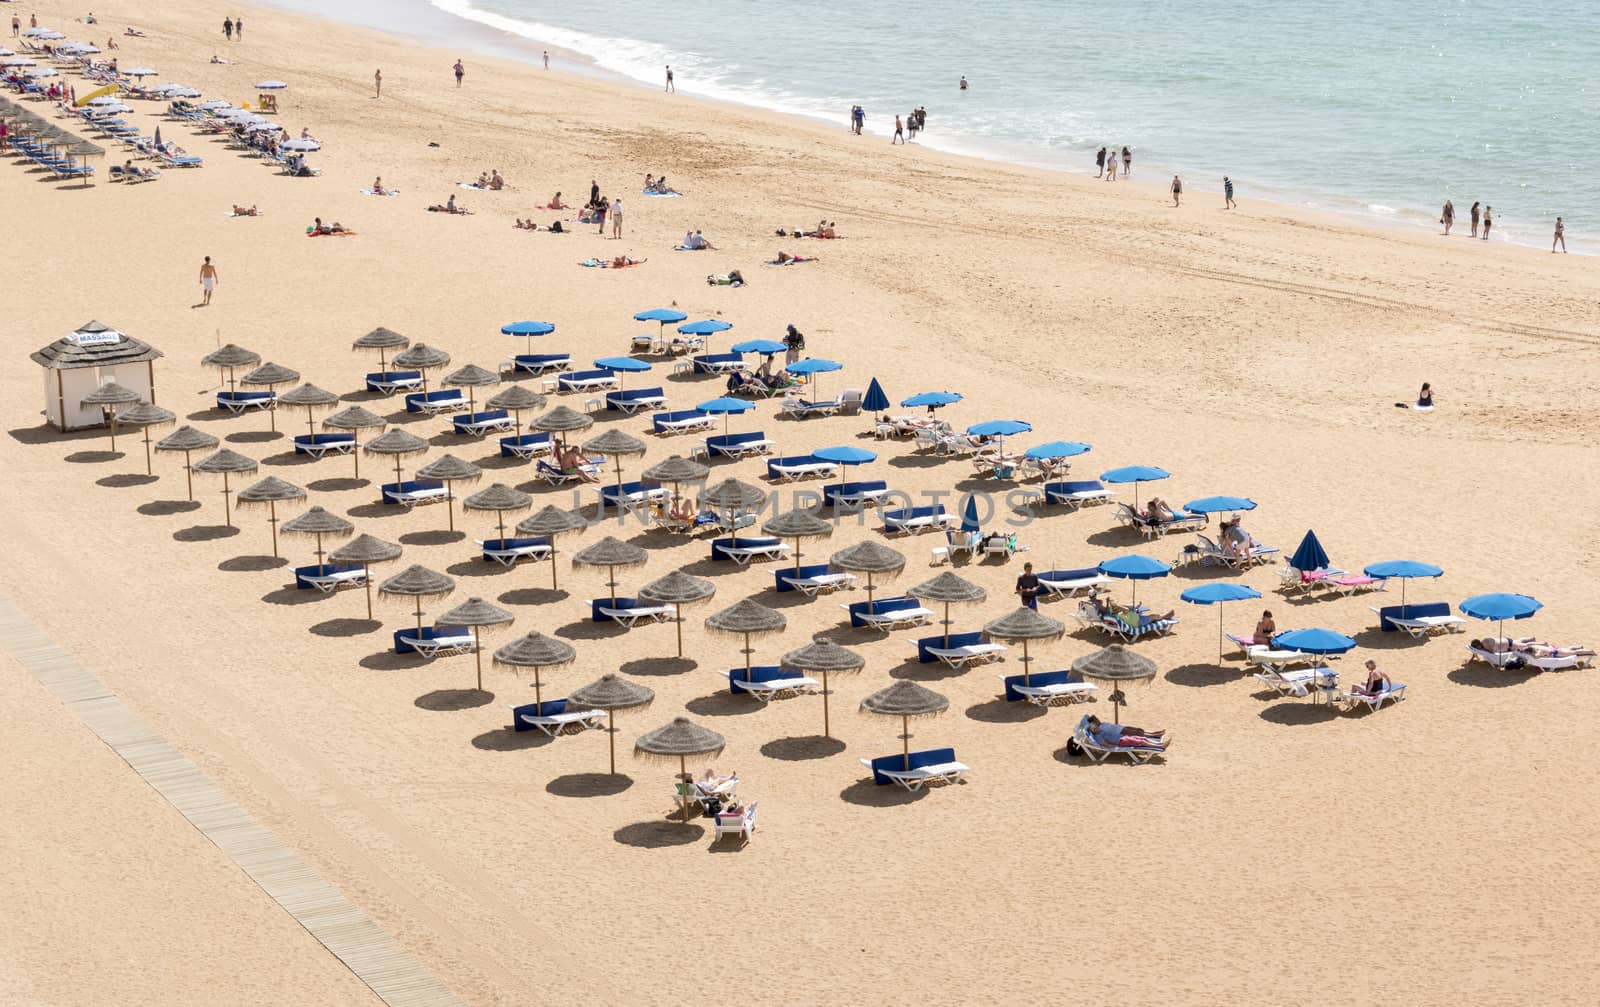 ALBUFEIRA, PORTUGAL - APRIL 23: View of crowded Falesia beach at the midday in the summer mediterranean resort Albufeira on April 23, 2015. This town is a part of famous tourist region Algarve.